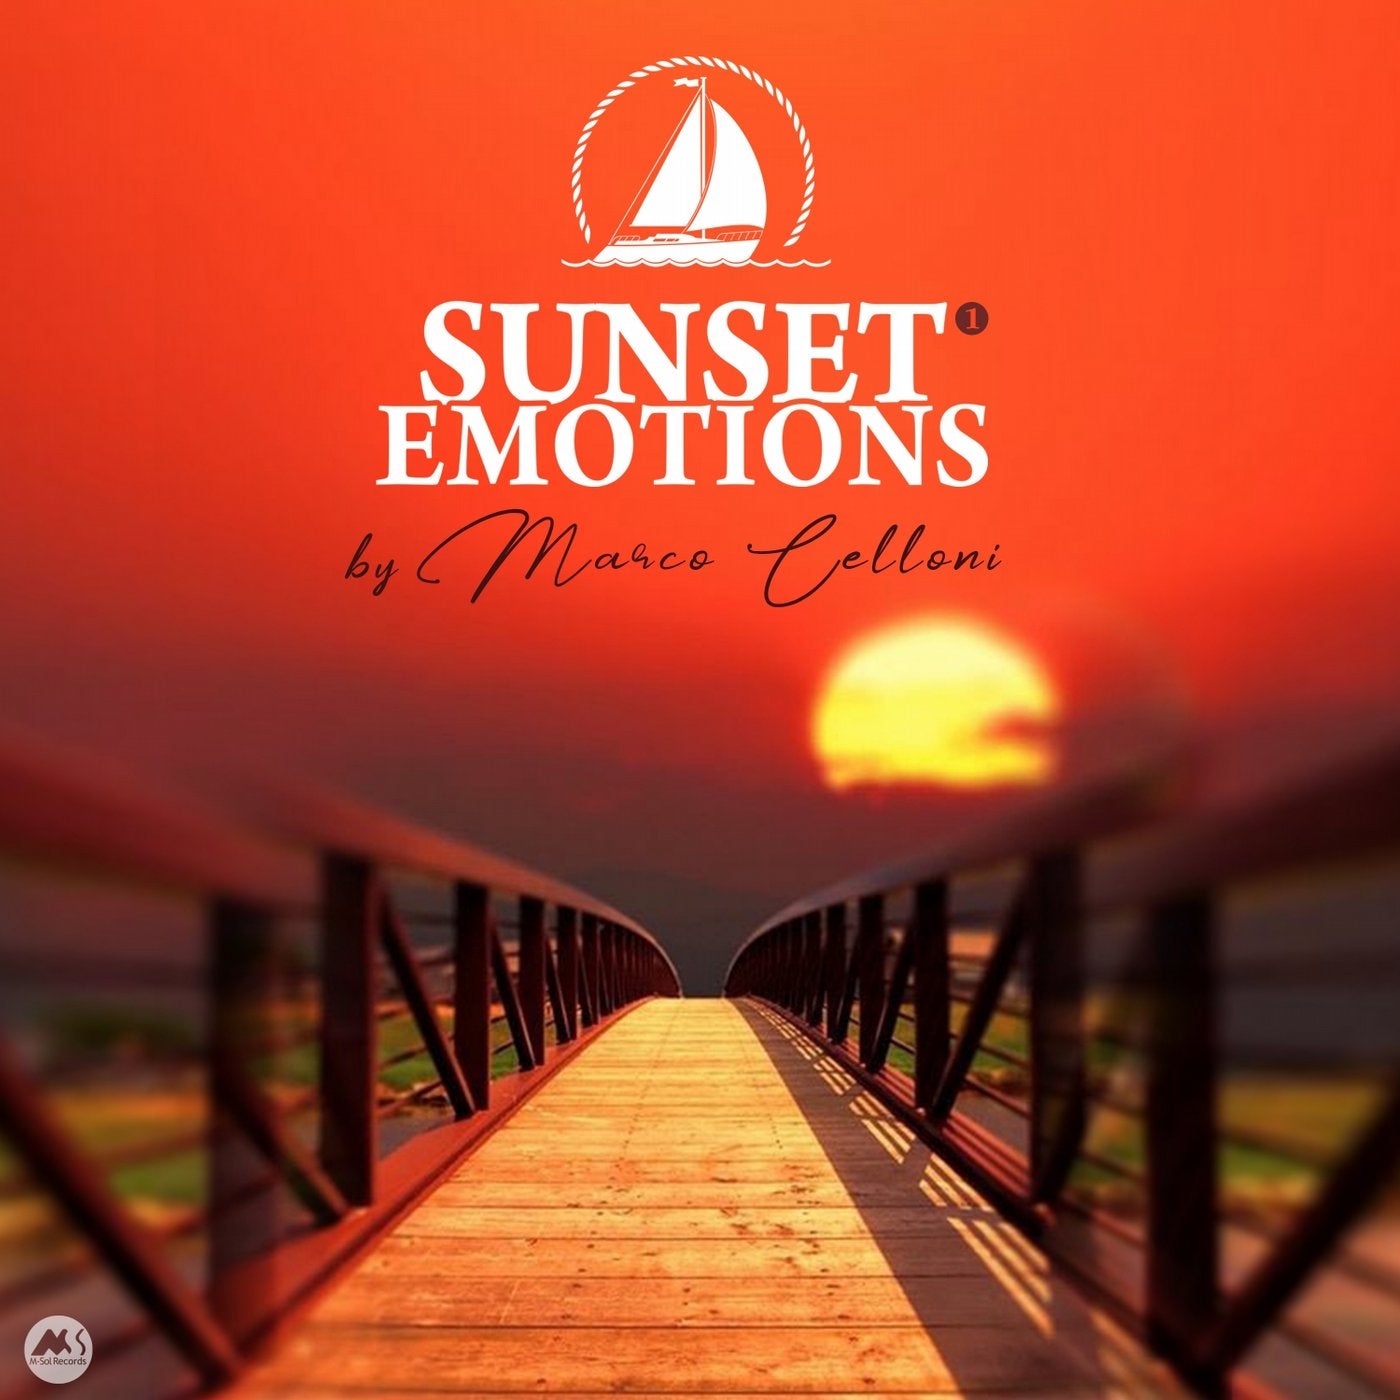 Sunset Emotions Vol.1 (Compiled by Marco Celloni)